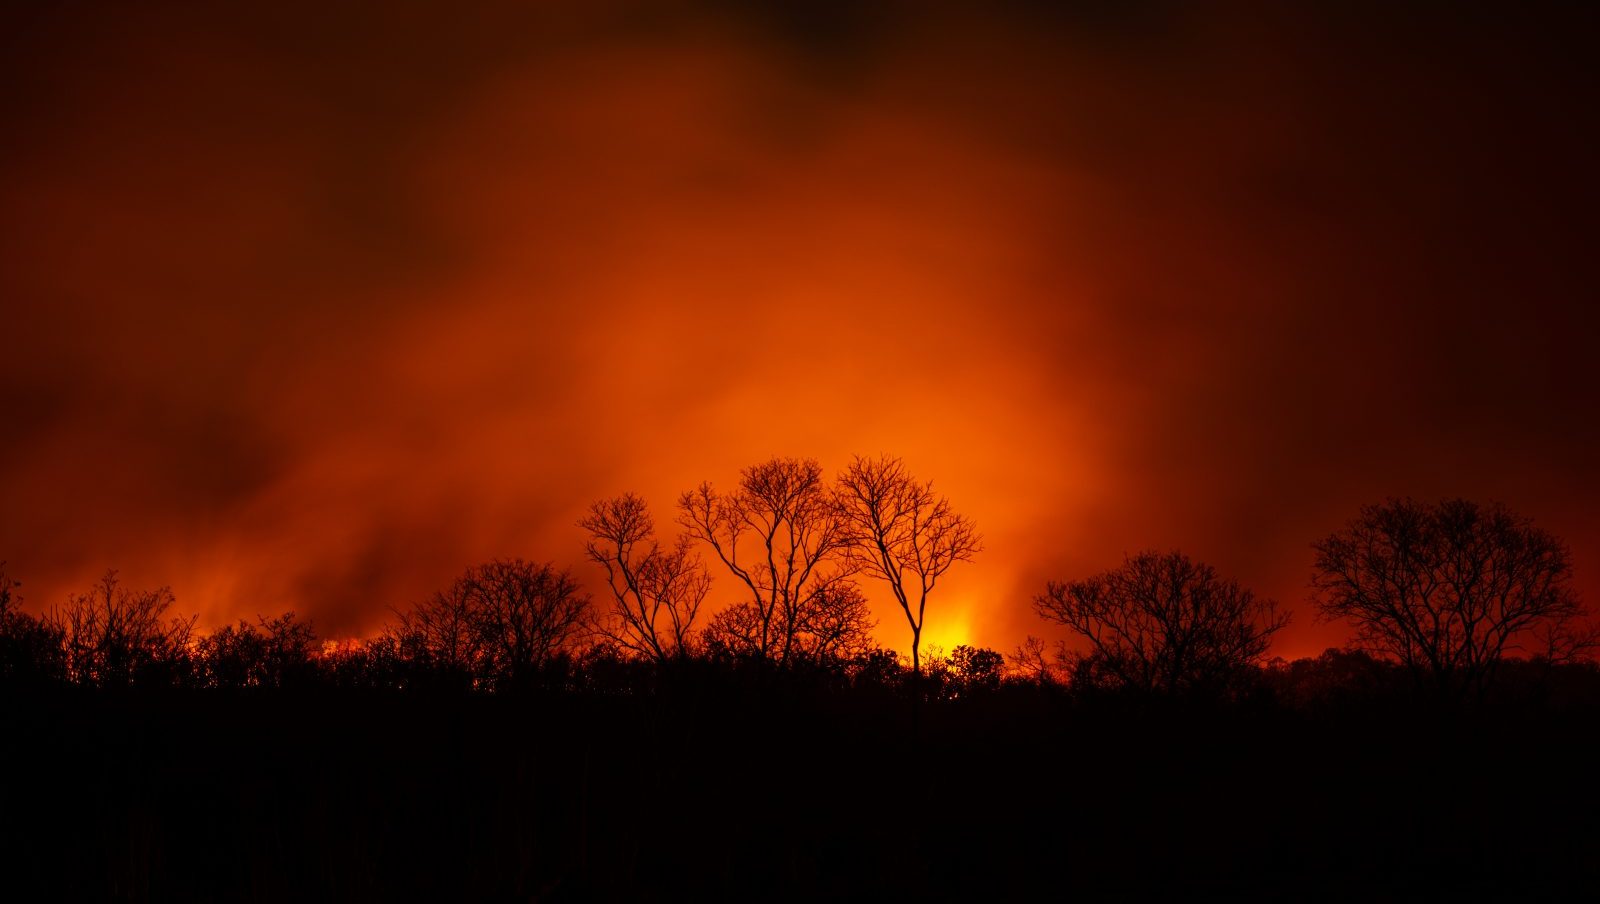 A photo of trees silhouetted against bright orange flames